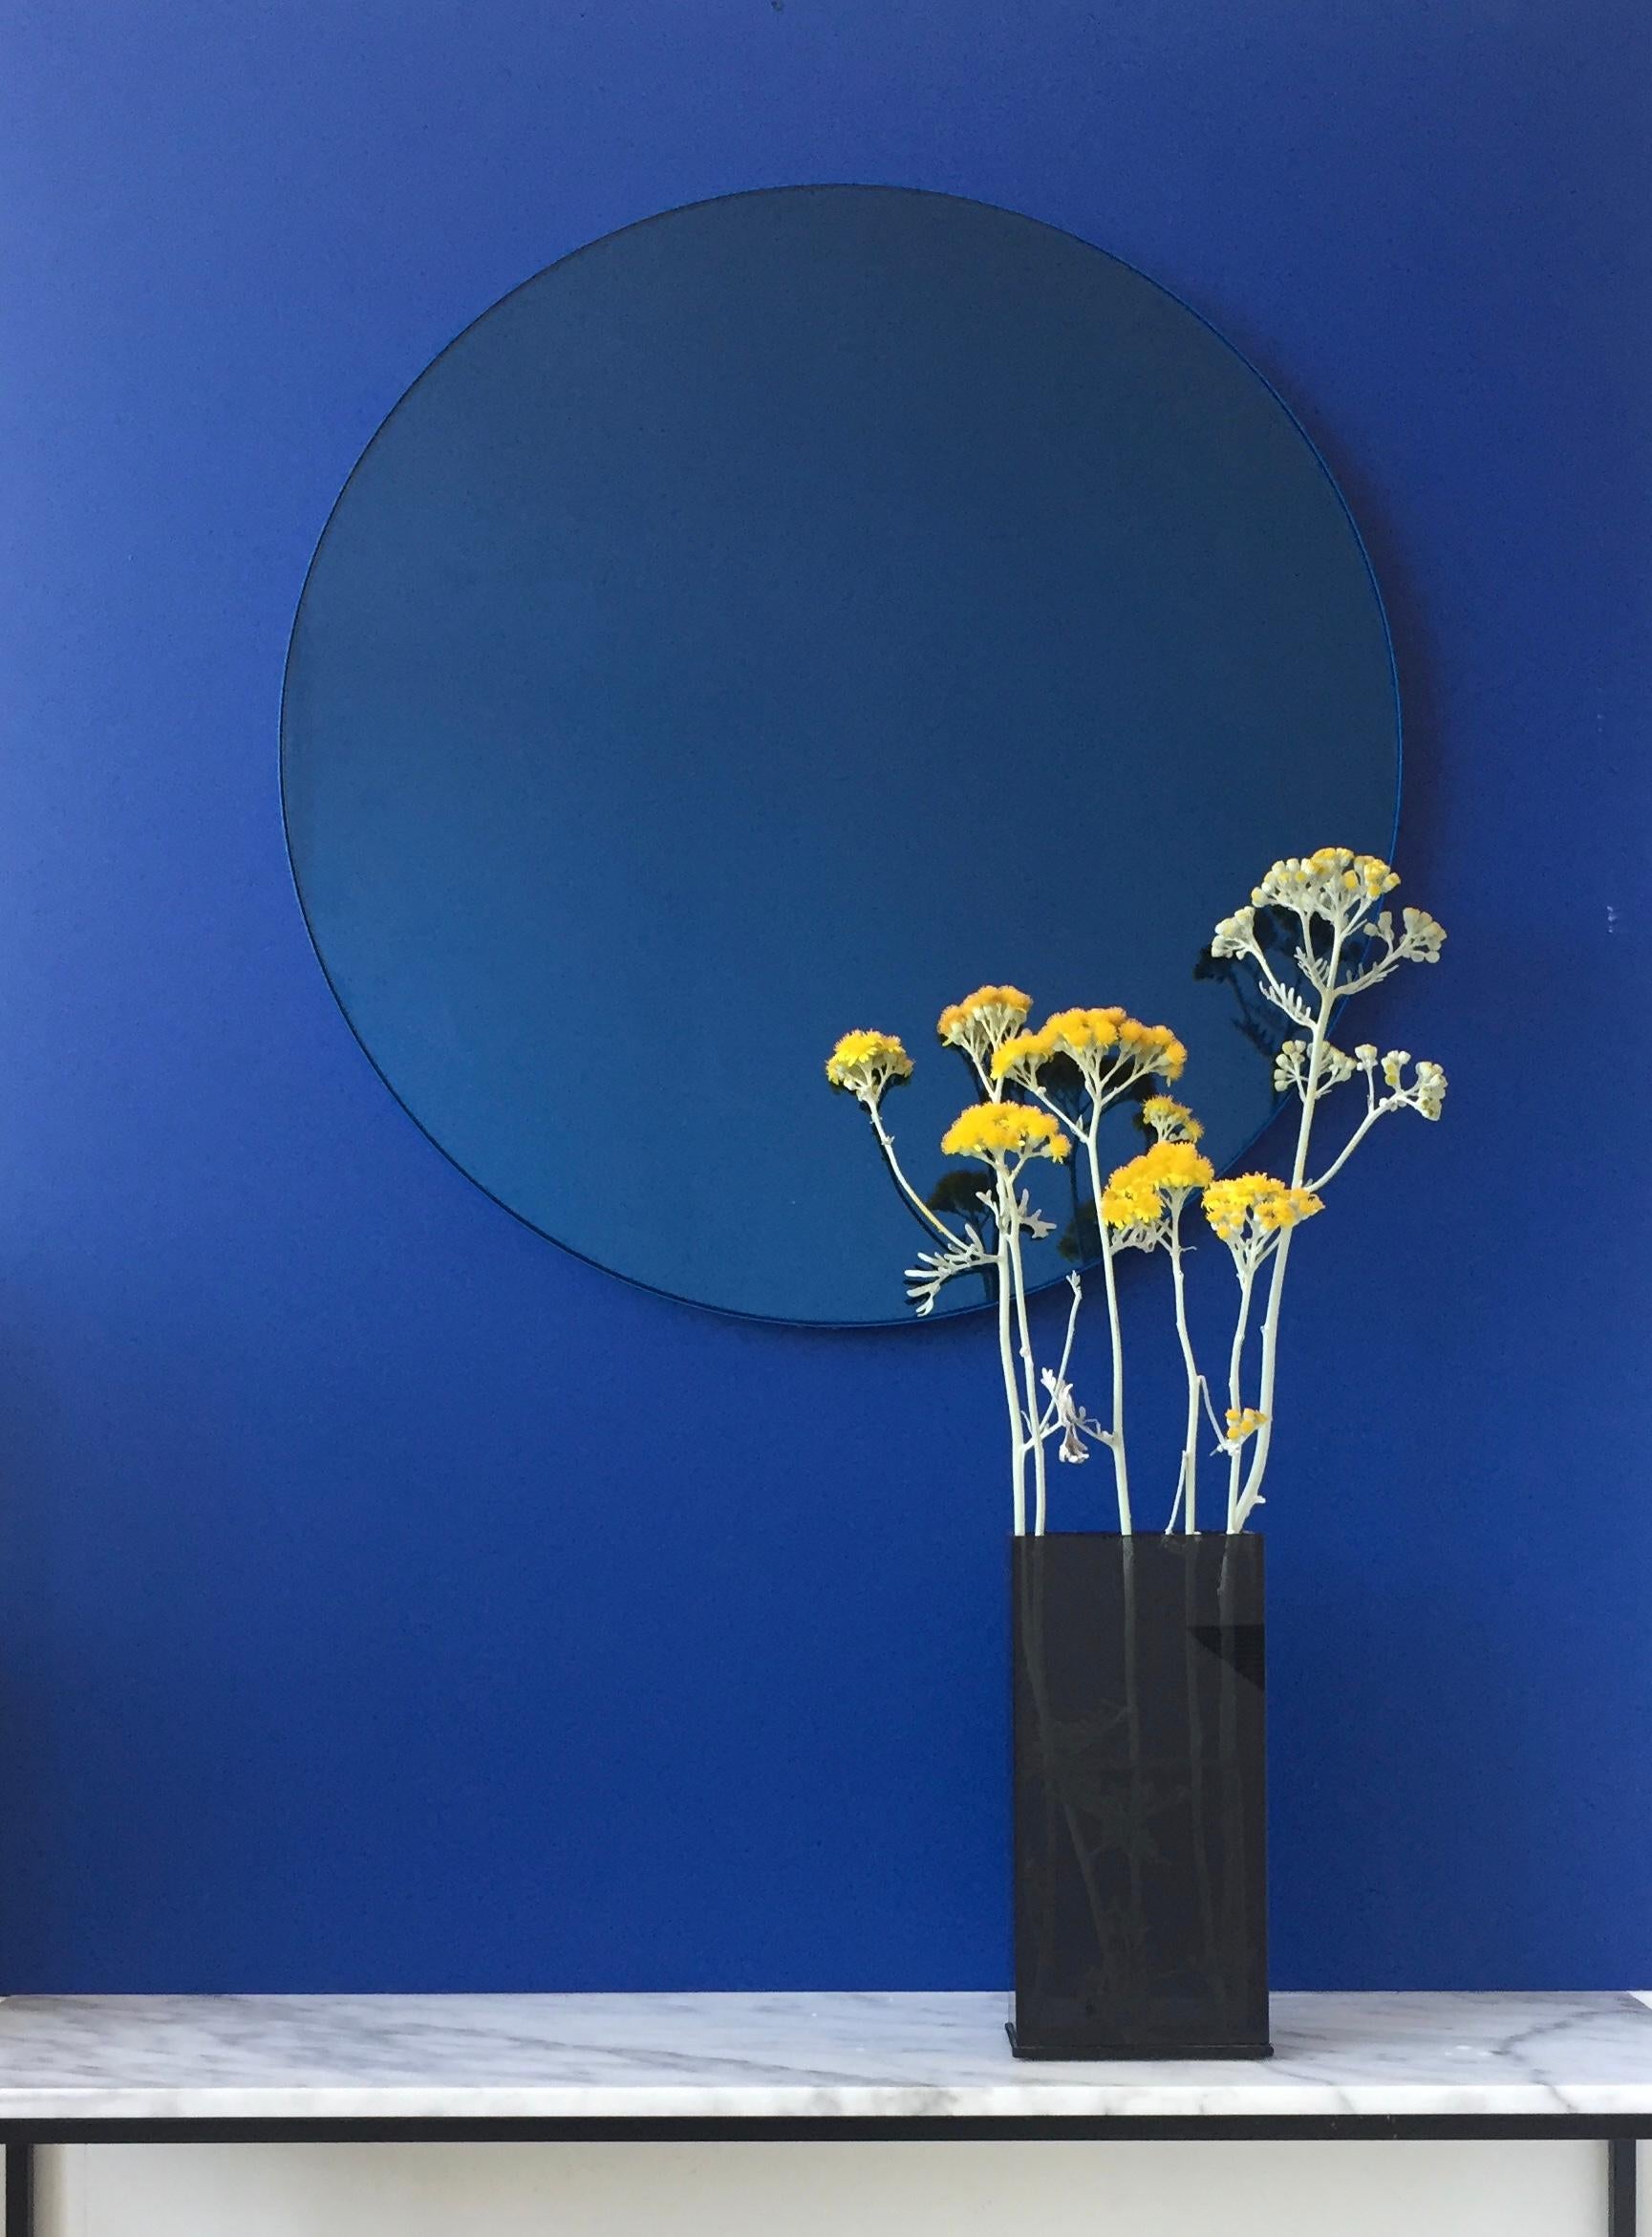 Powder-Coated Orbis Blue Tinted Decorative Round Mirror with a Blue Frame, Large For Sale